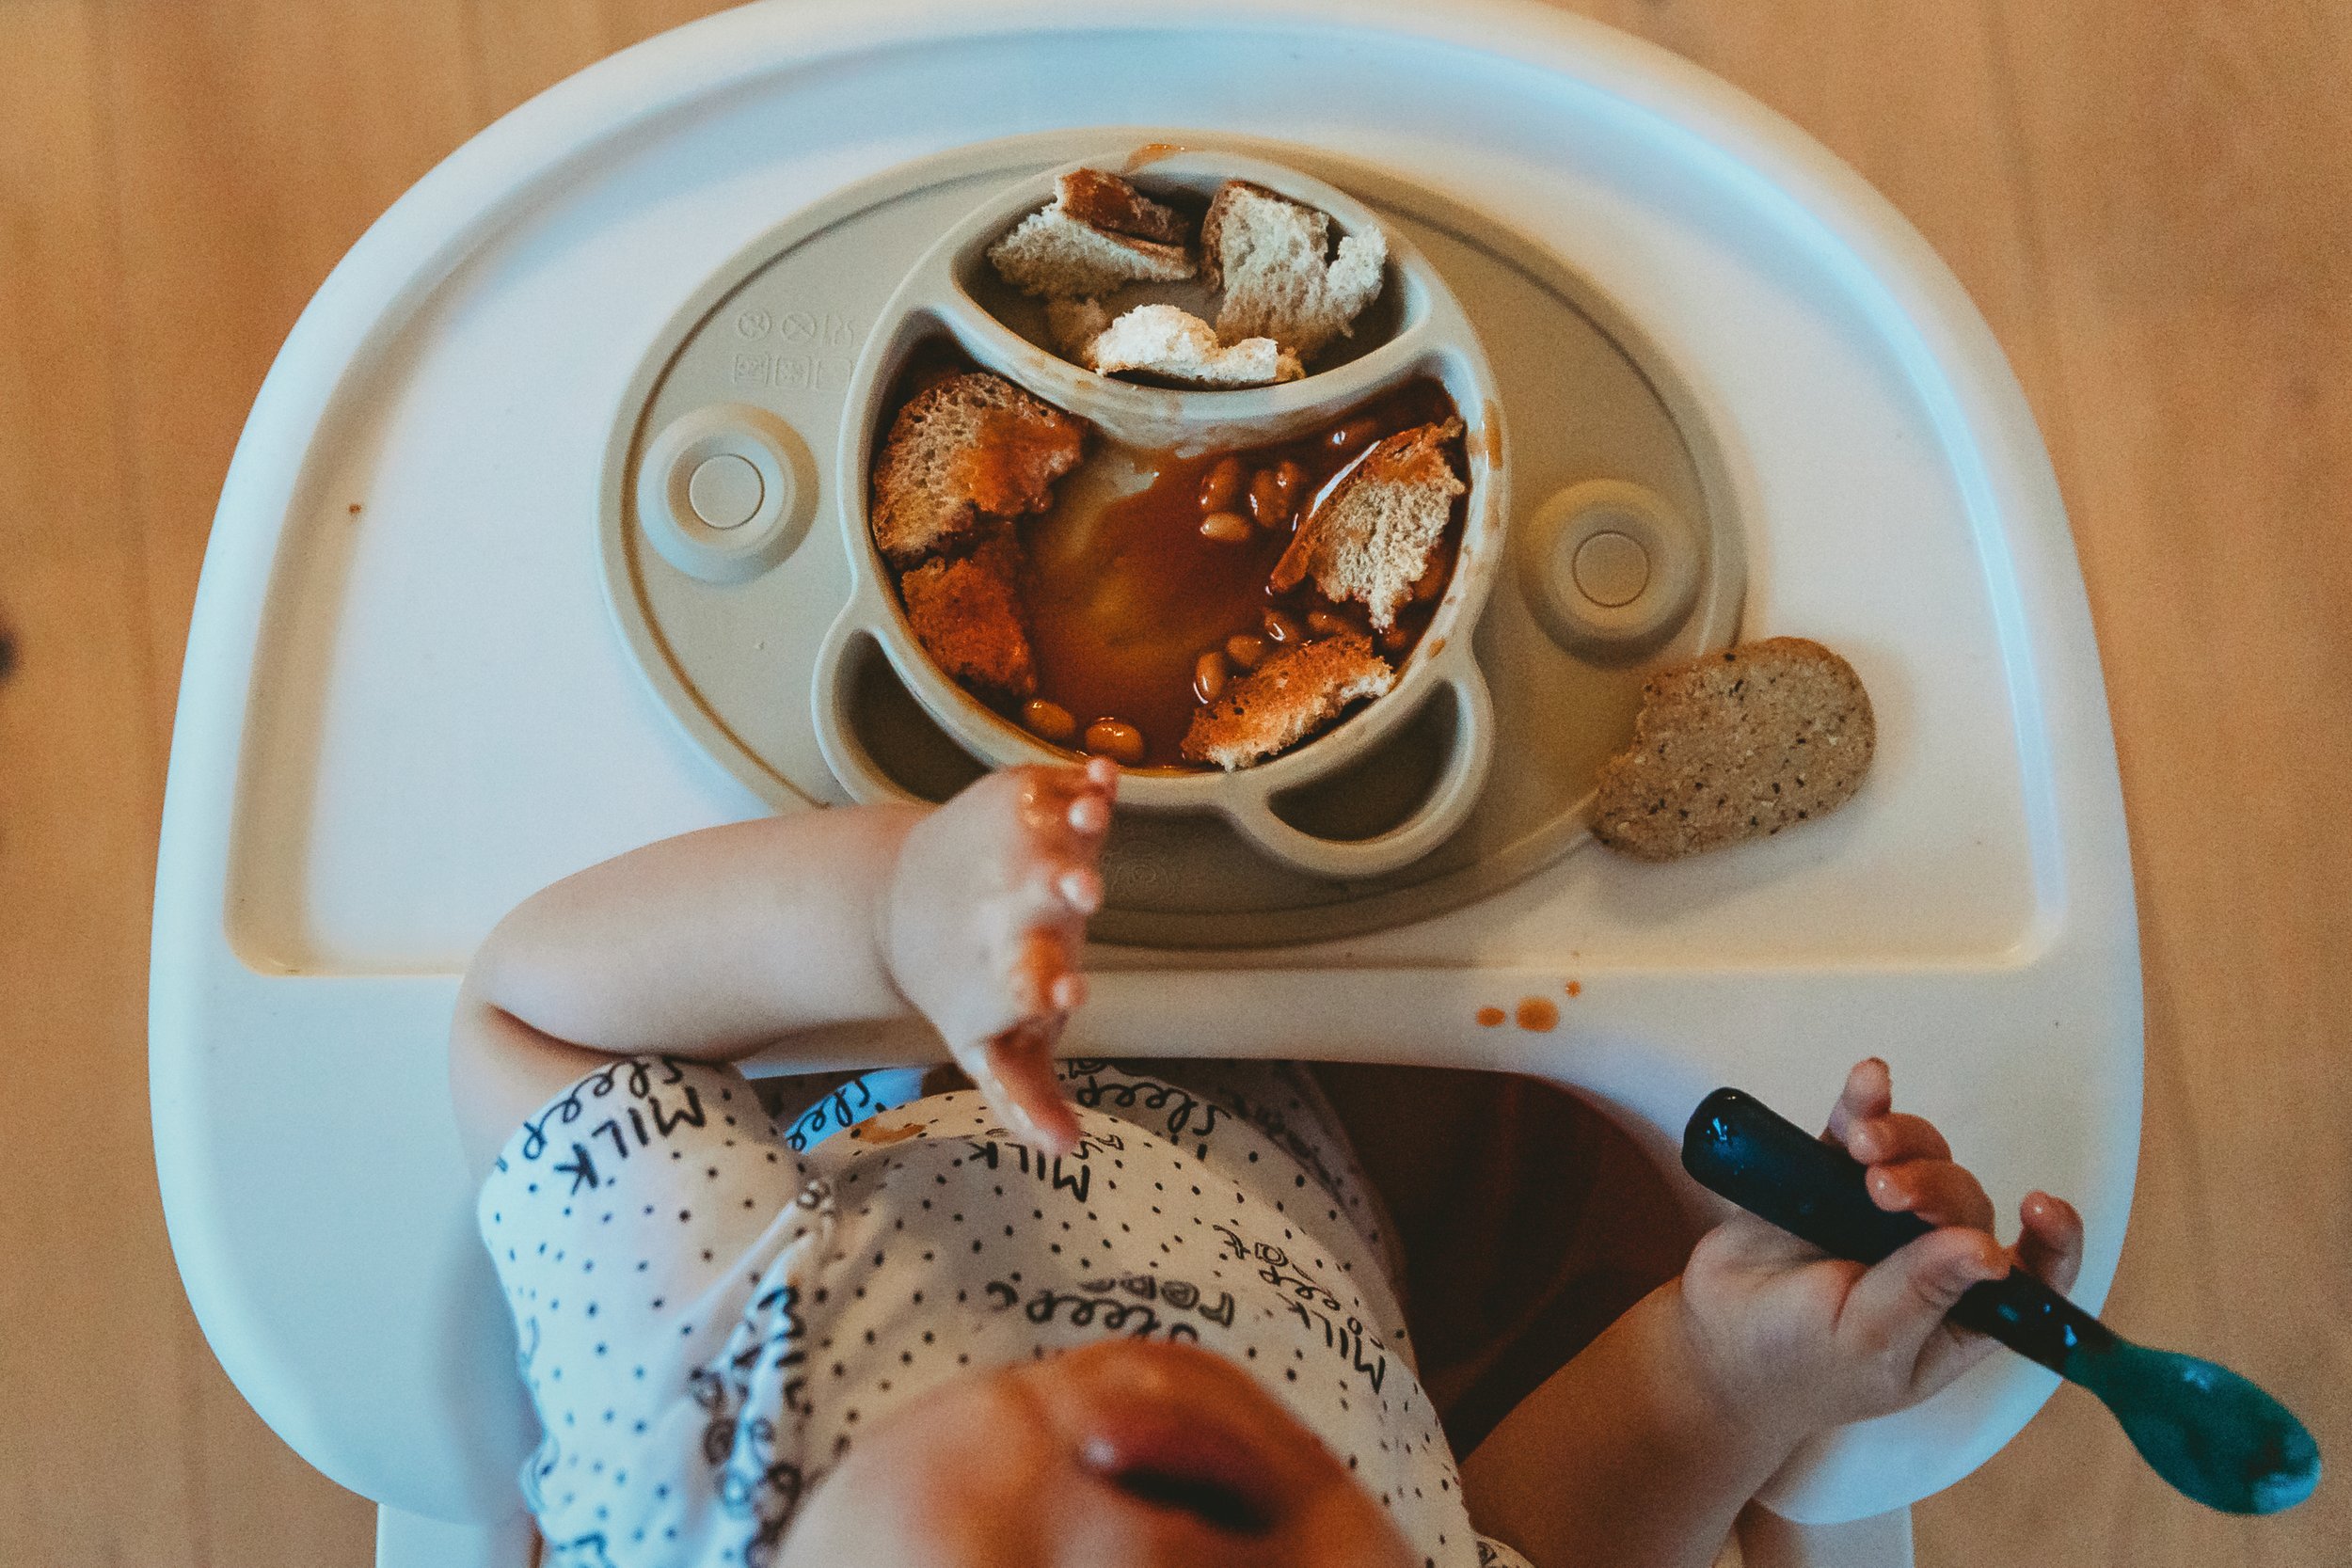 Top down view of baby eating in highchair